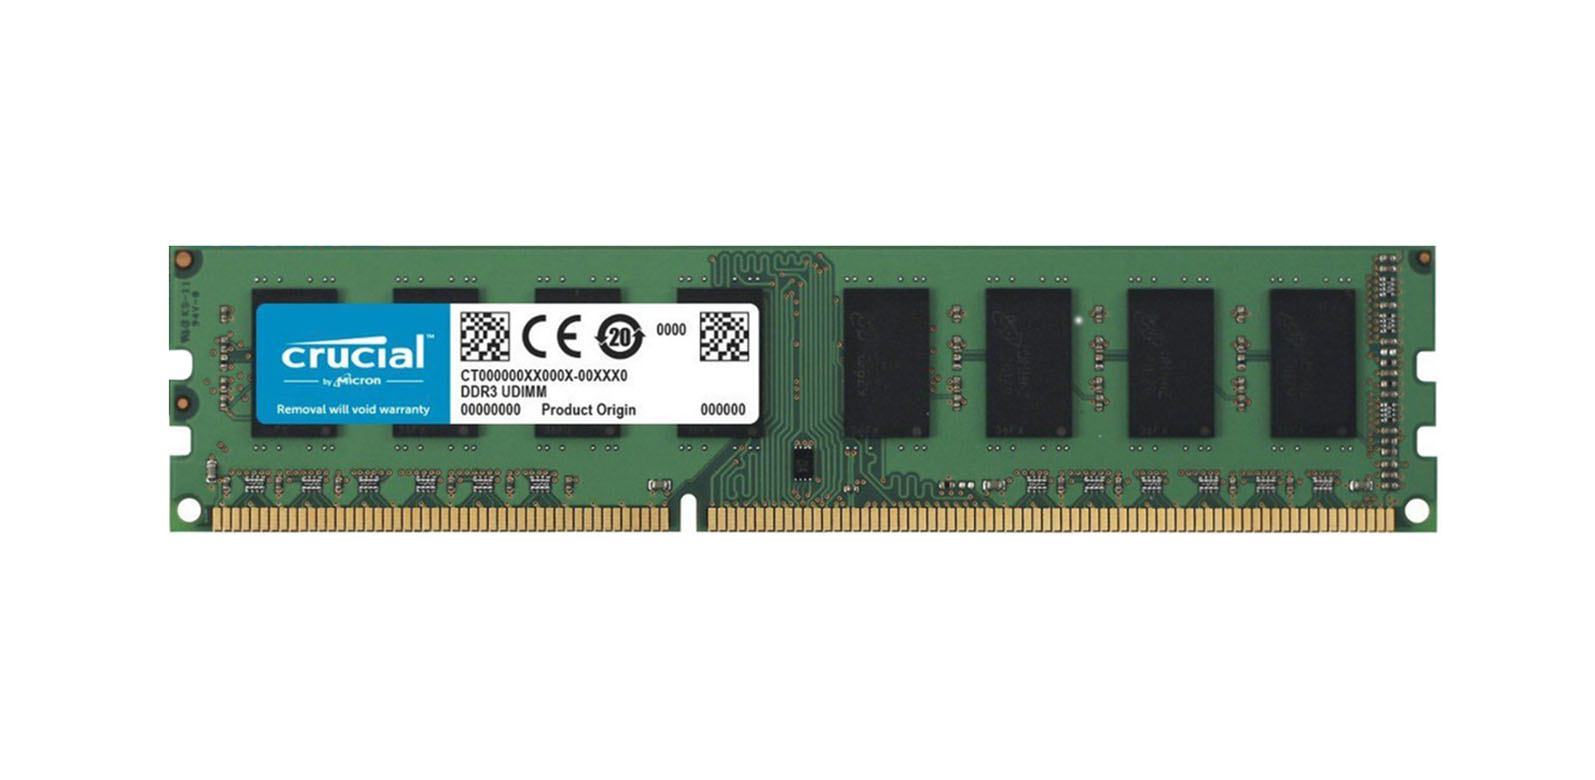 Crucial CT4081425 8GB DDR3-1600MHz PC3-12800 ECC Registered CL11 240-Pin DIMM 1.35V Low Voltage Dual Rank Very Low Profile (VLP) Memory Module upgrade for Supermicro X9DRFF-iTG+